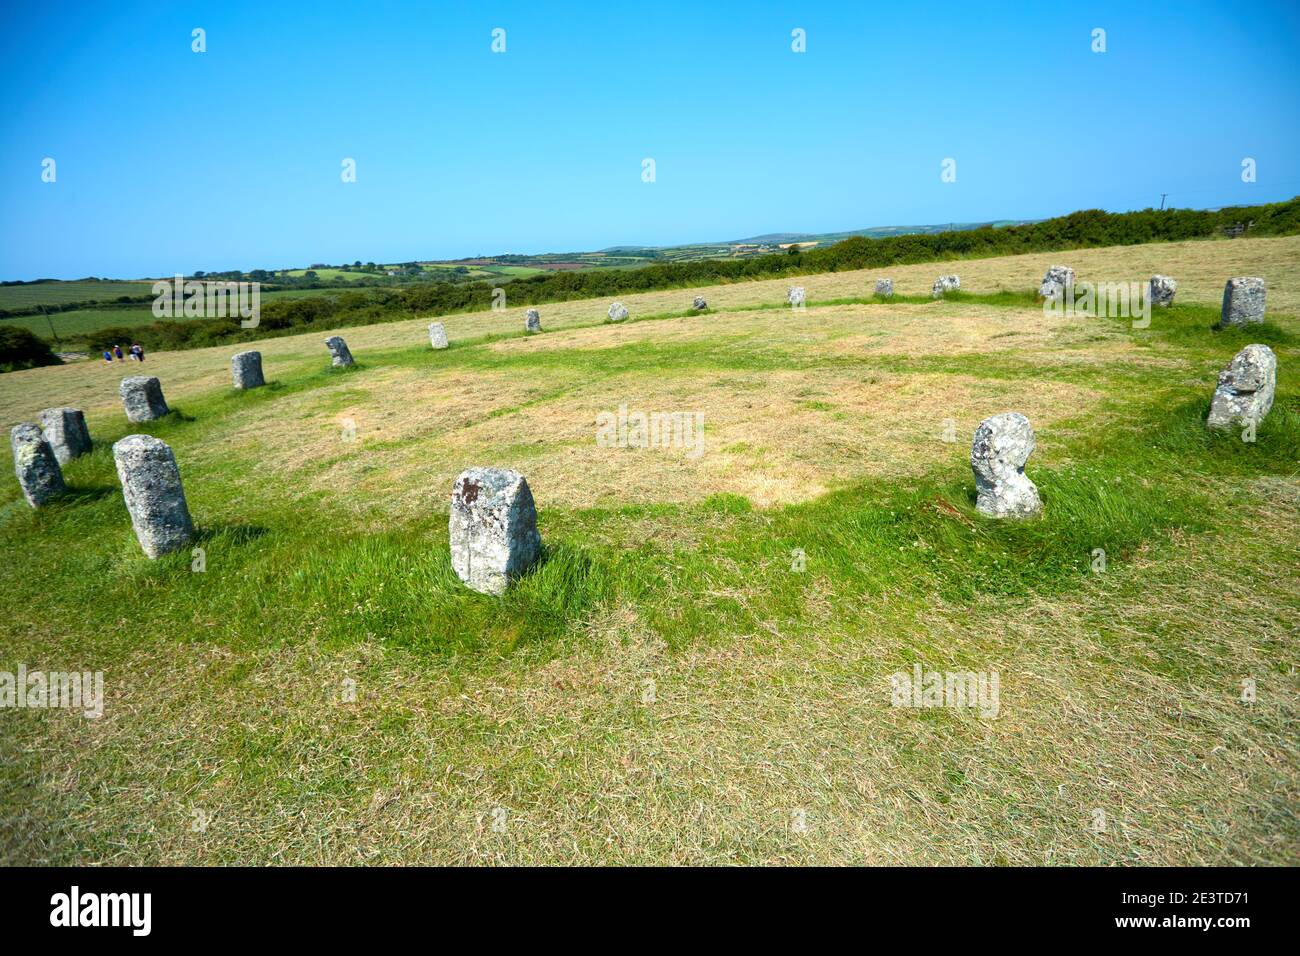 The Merry Maidens of Boleigh Stone Circle, consisting of 19 stones and also known as Dawn's Men, located between Lamorna and St Buryan in Cornwall Stock Photo